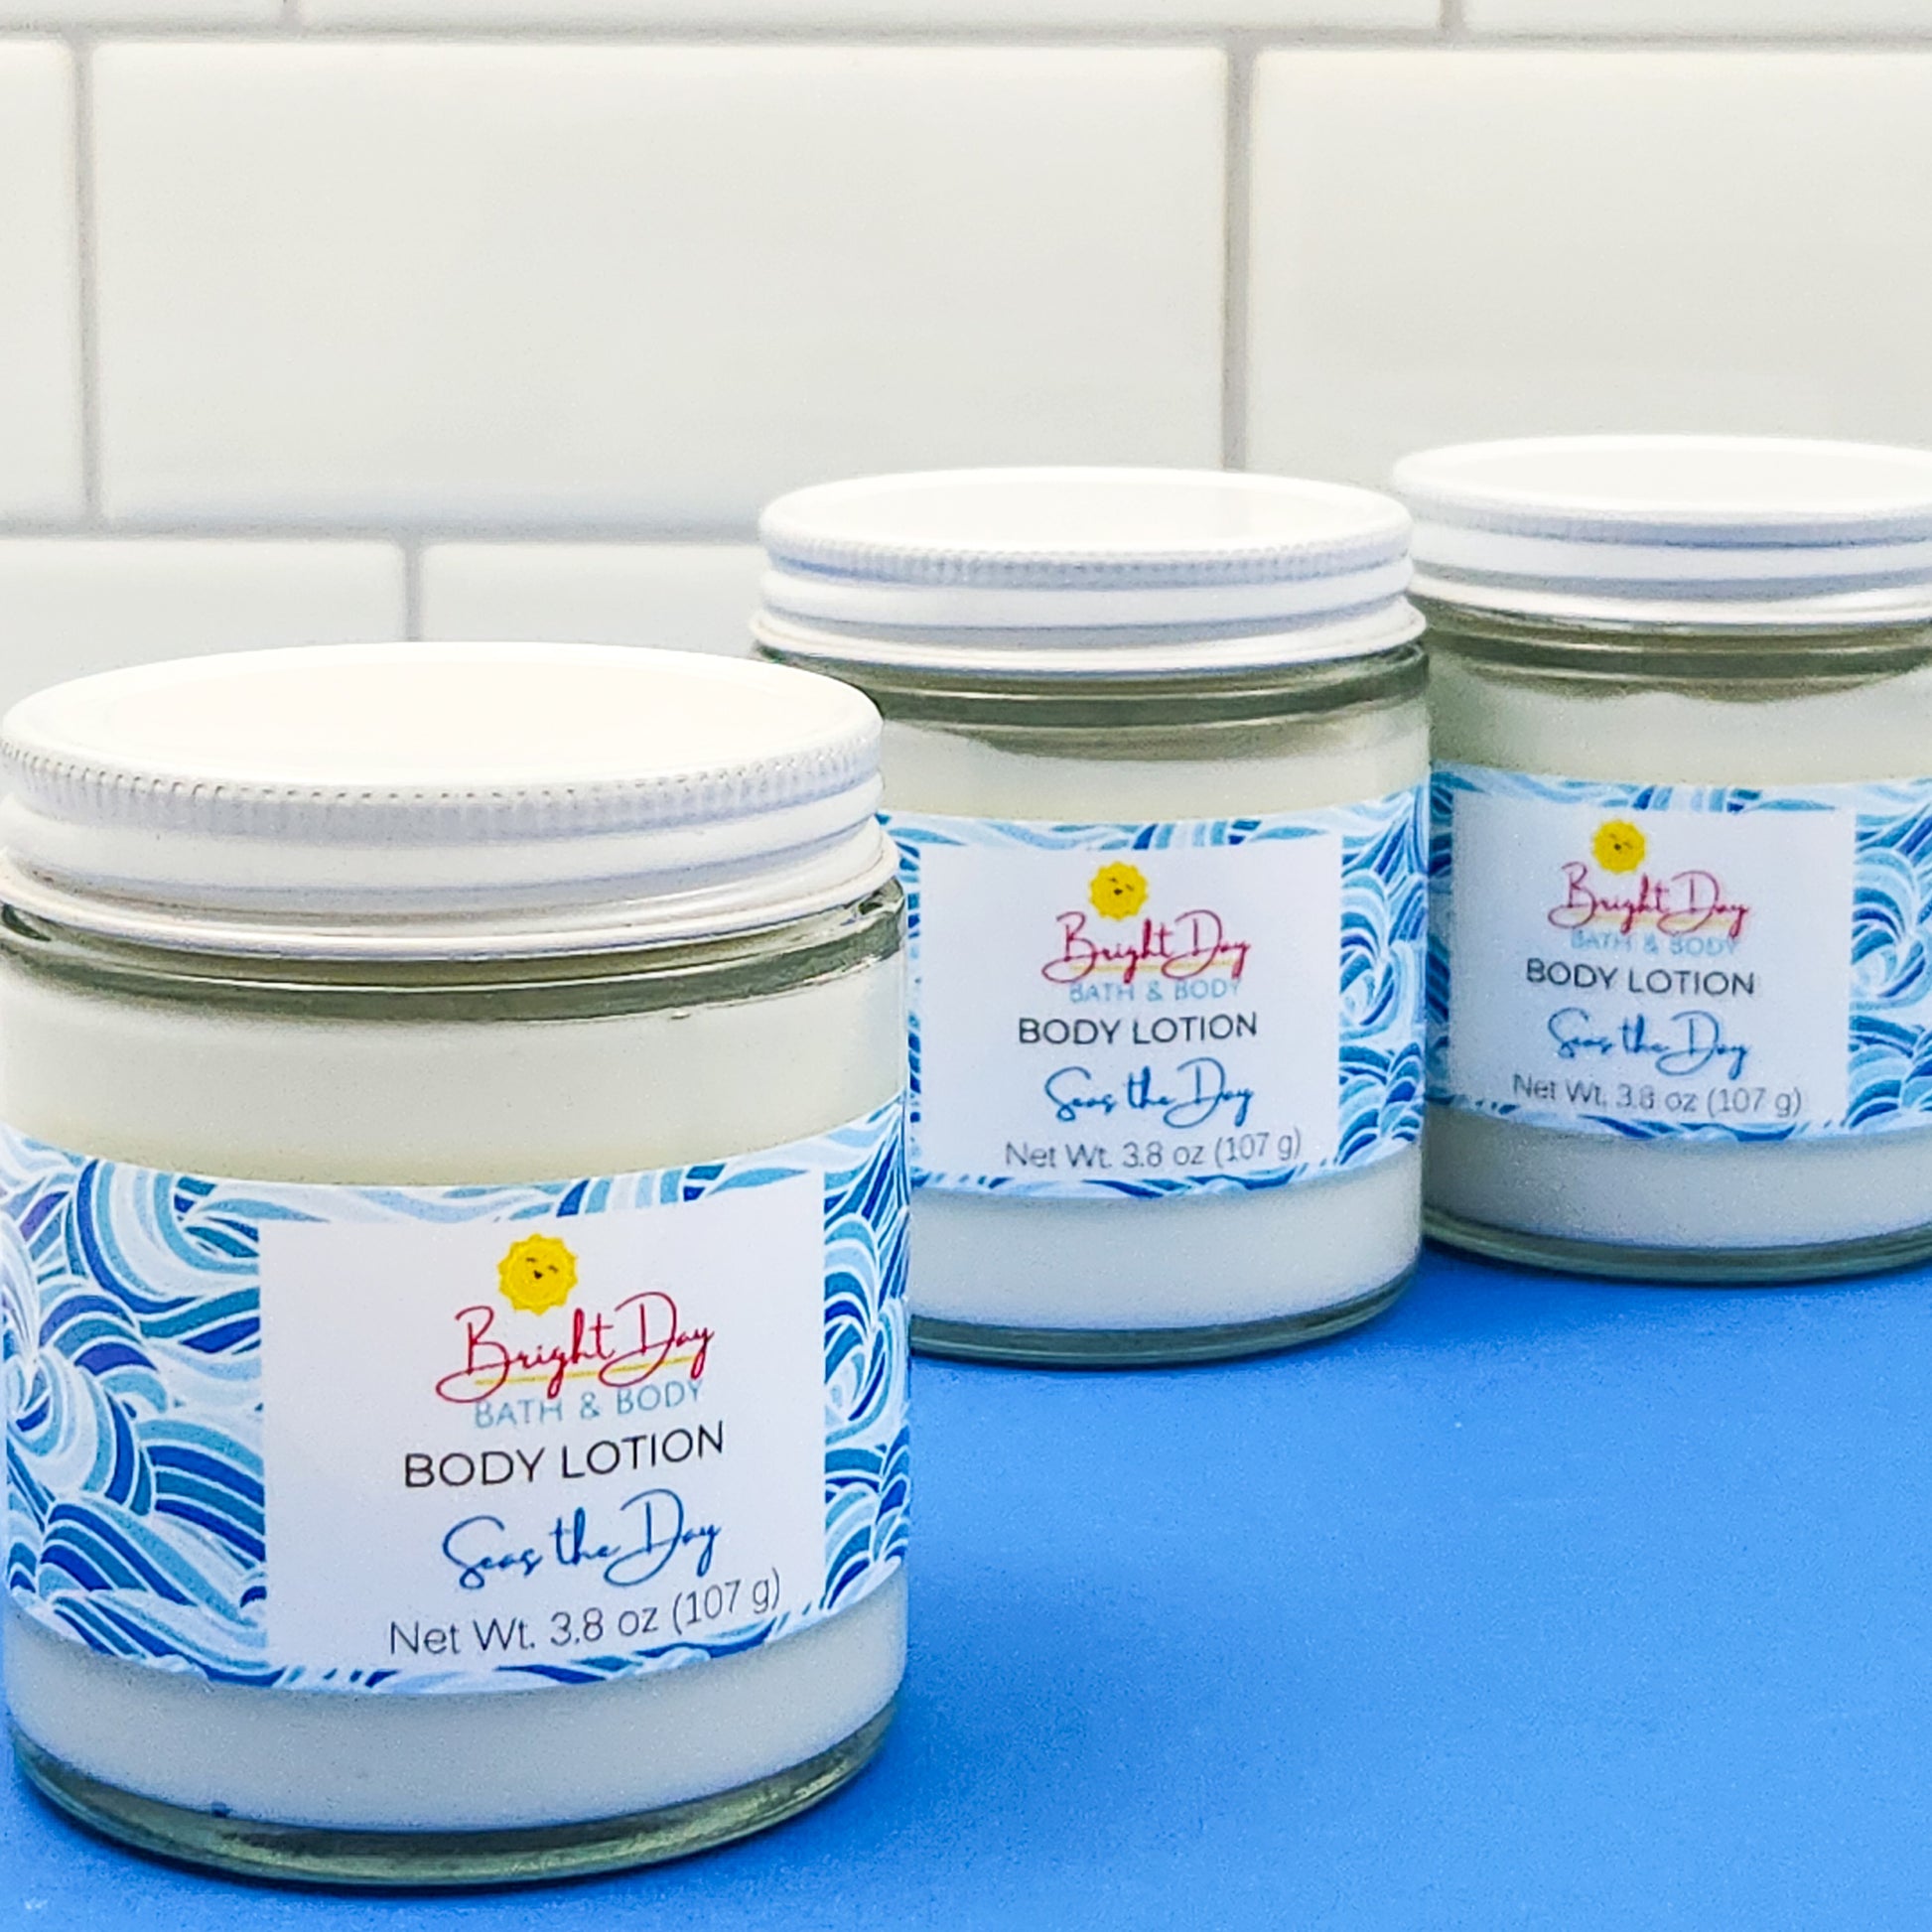 Three jars of Seas the Day Body Lotion on a blue and white background